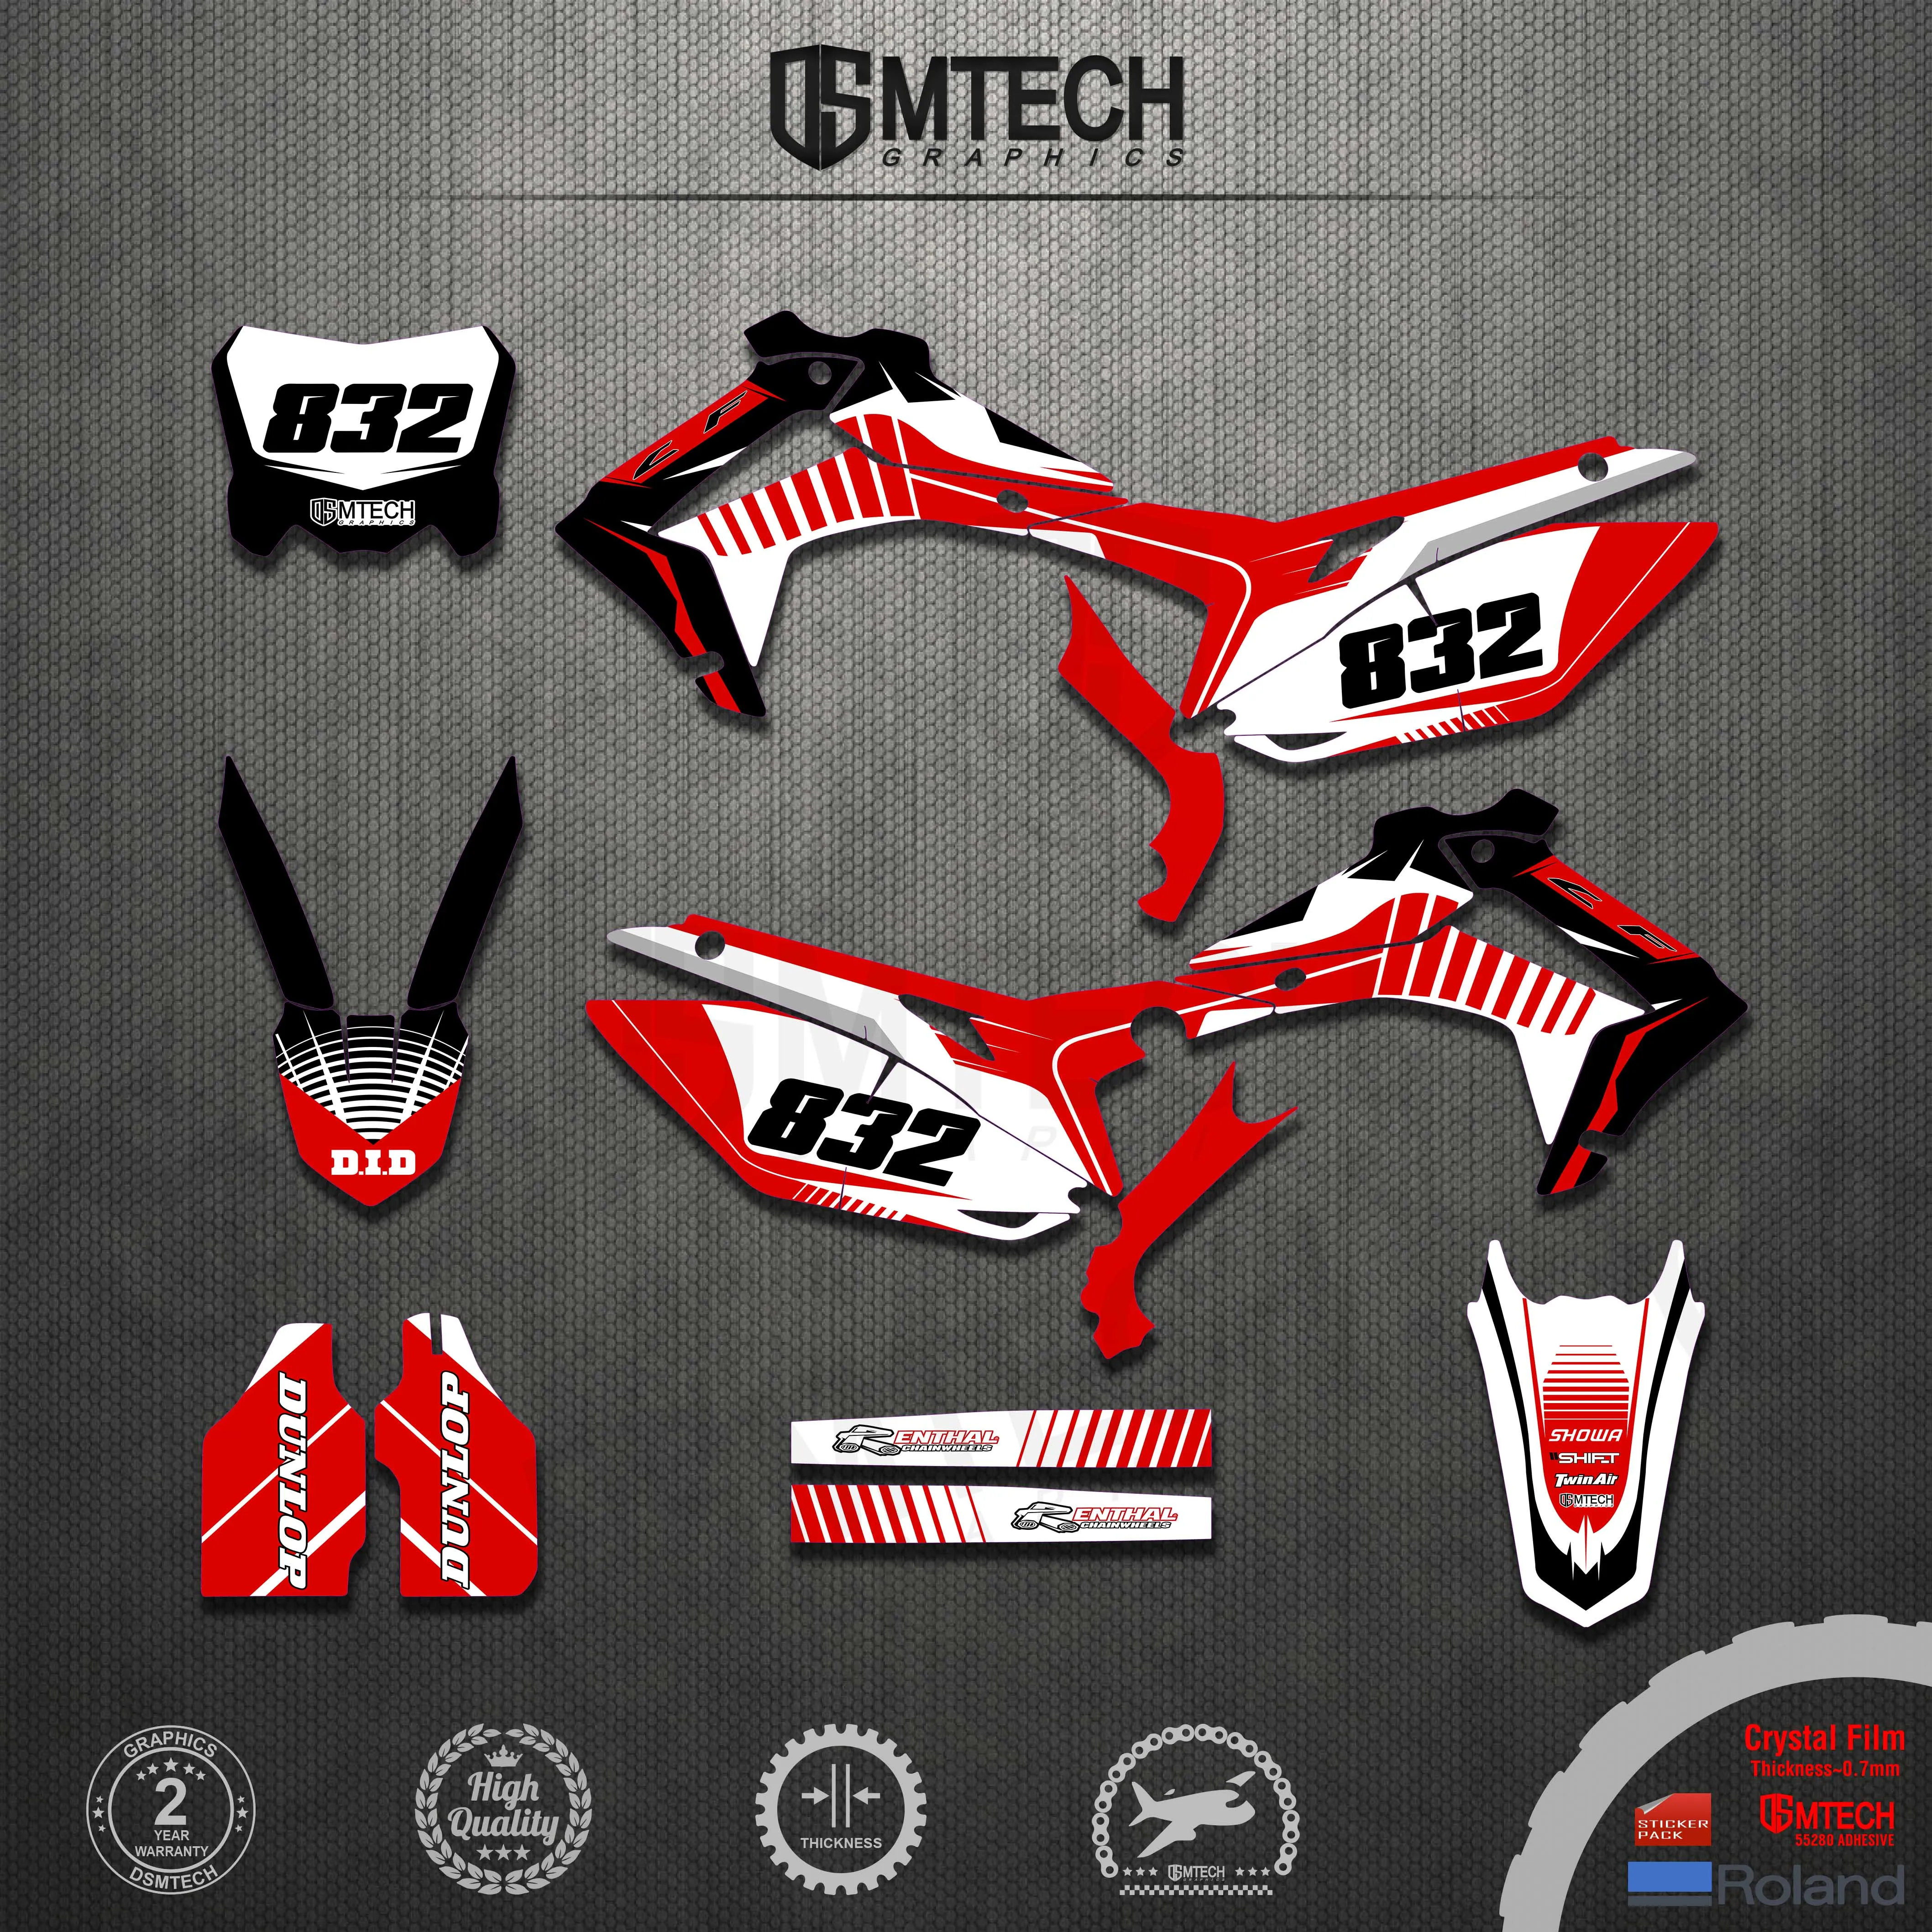 DSMTECH Graphics DECALS STICKERS Kits For HONDA CRF450 CRF450R 2013 2014 2015 2016 For Honda CRF250R 2014 2015 2016 2017